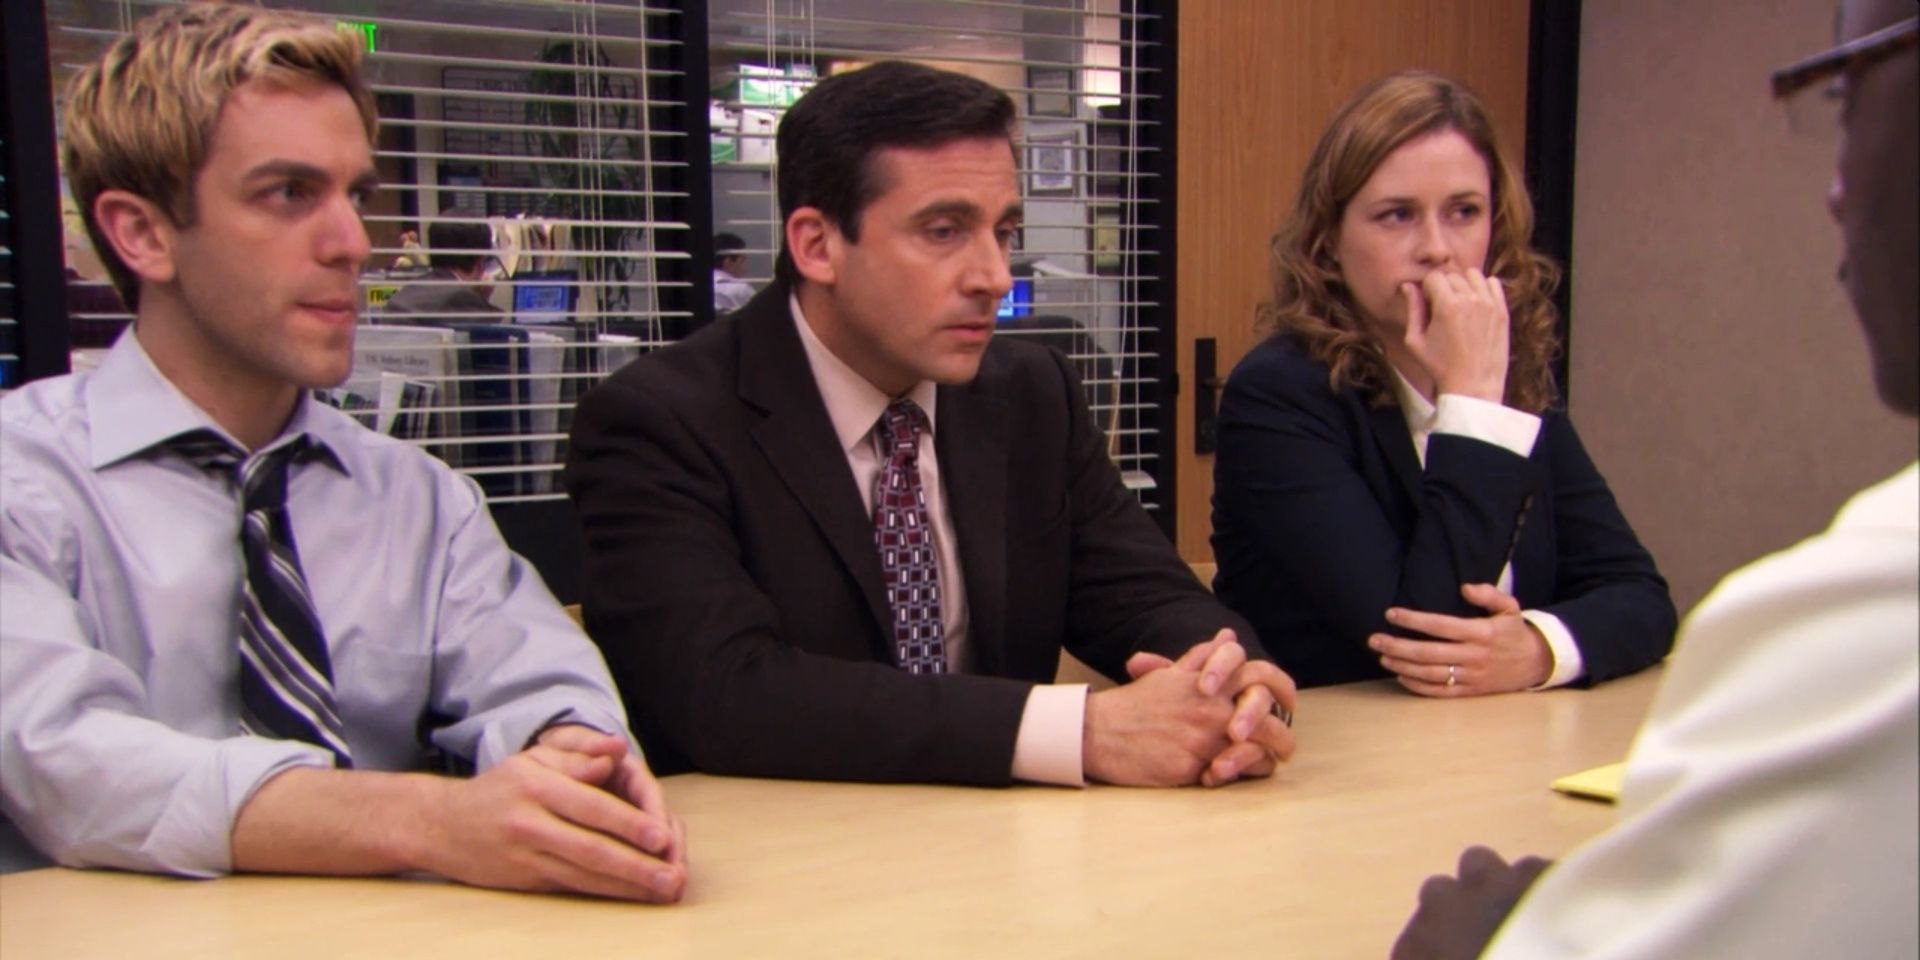 Michael Standing Up For Ryan and Pam.